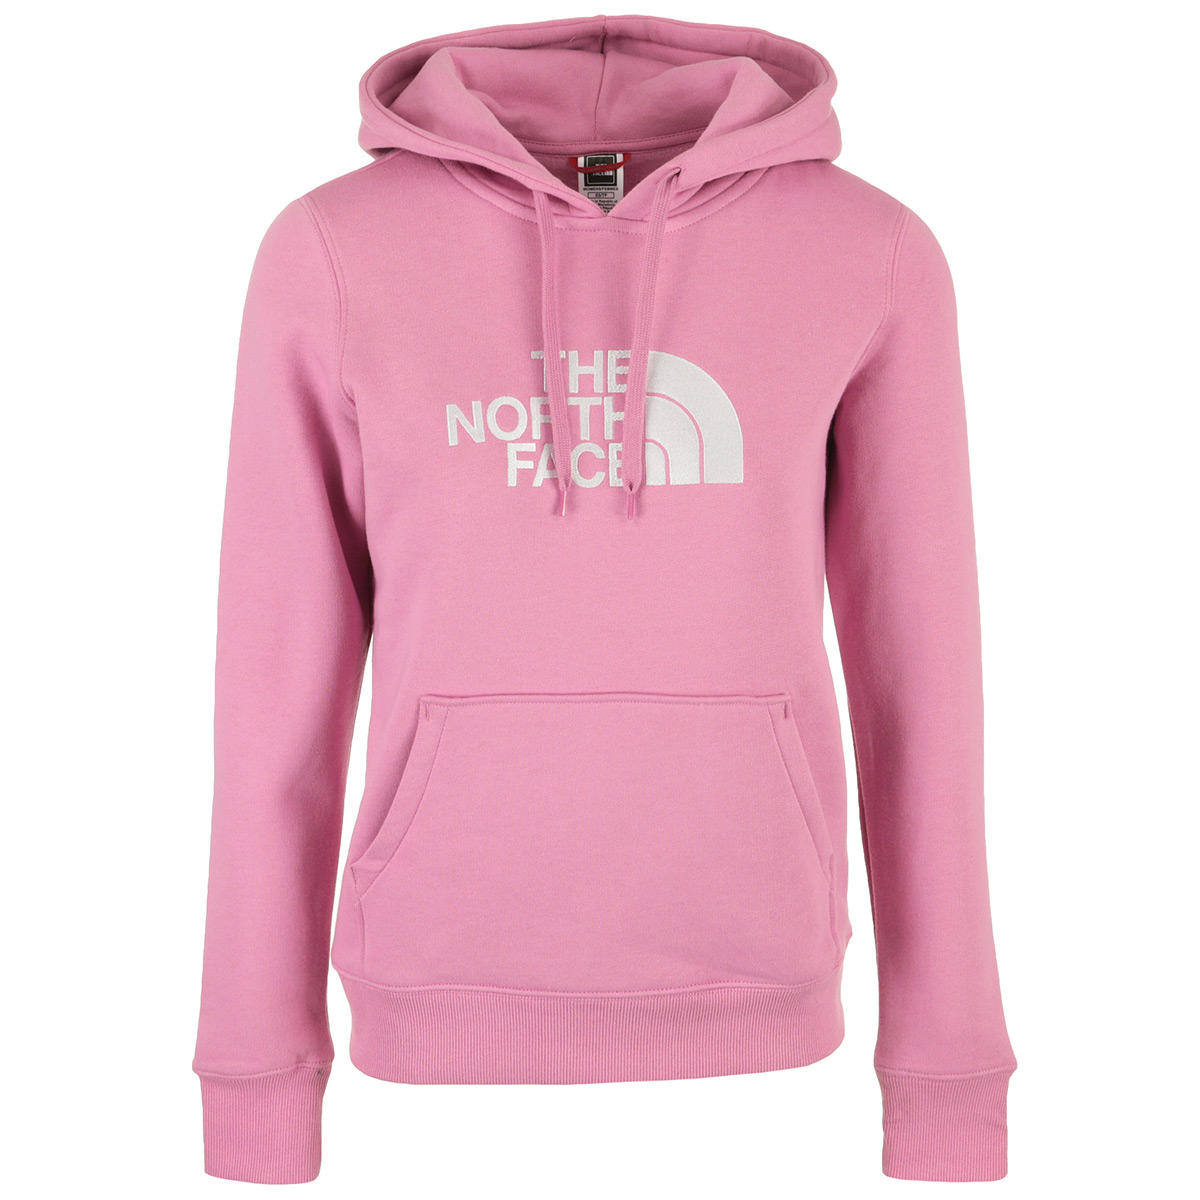 The North Face Drew Peak Pullover Hoodie Wn's